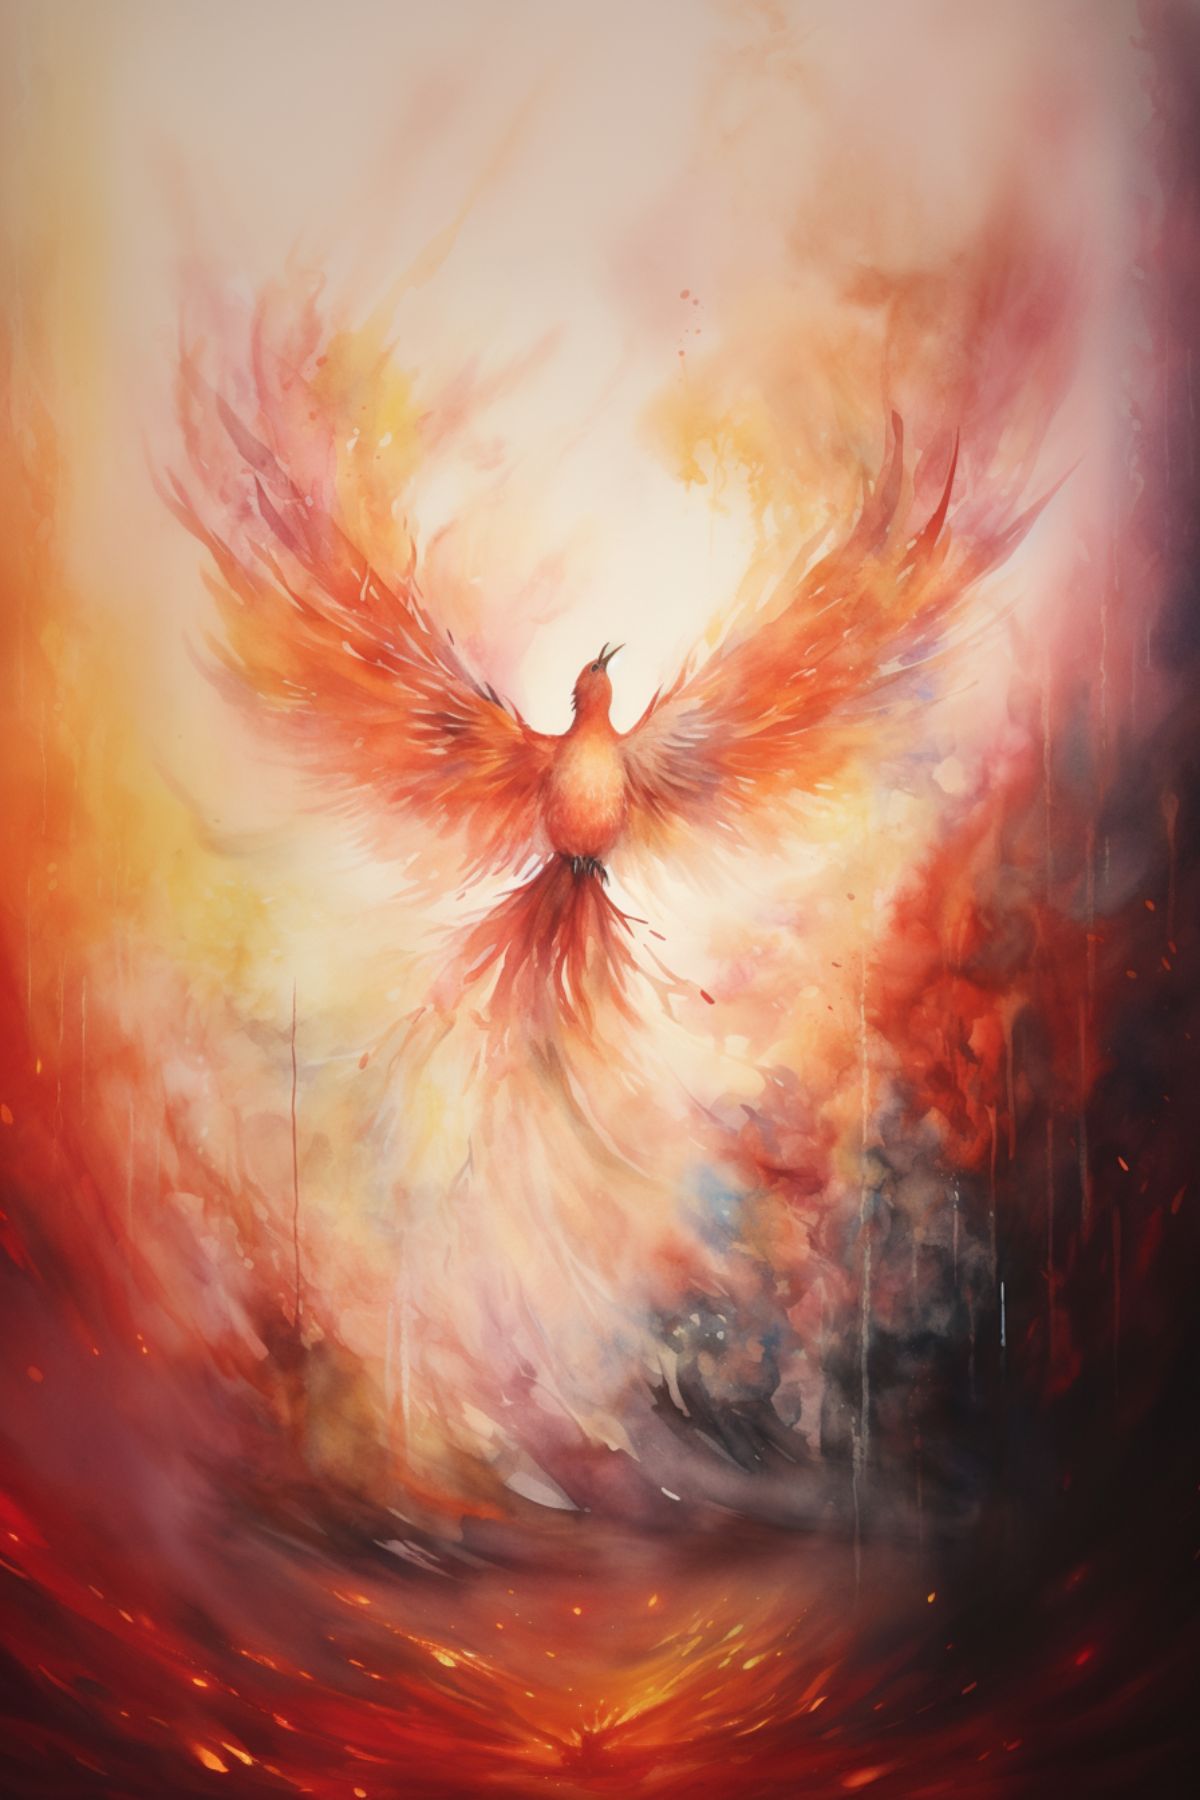 watercolor image of a Phoenix rising from the ashes